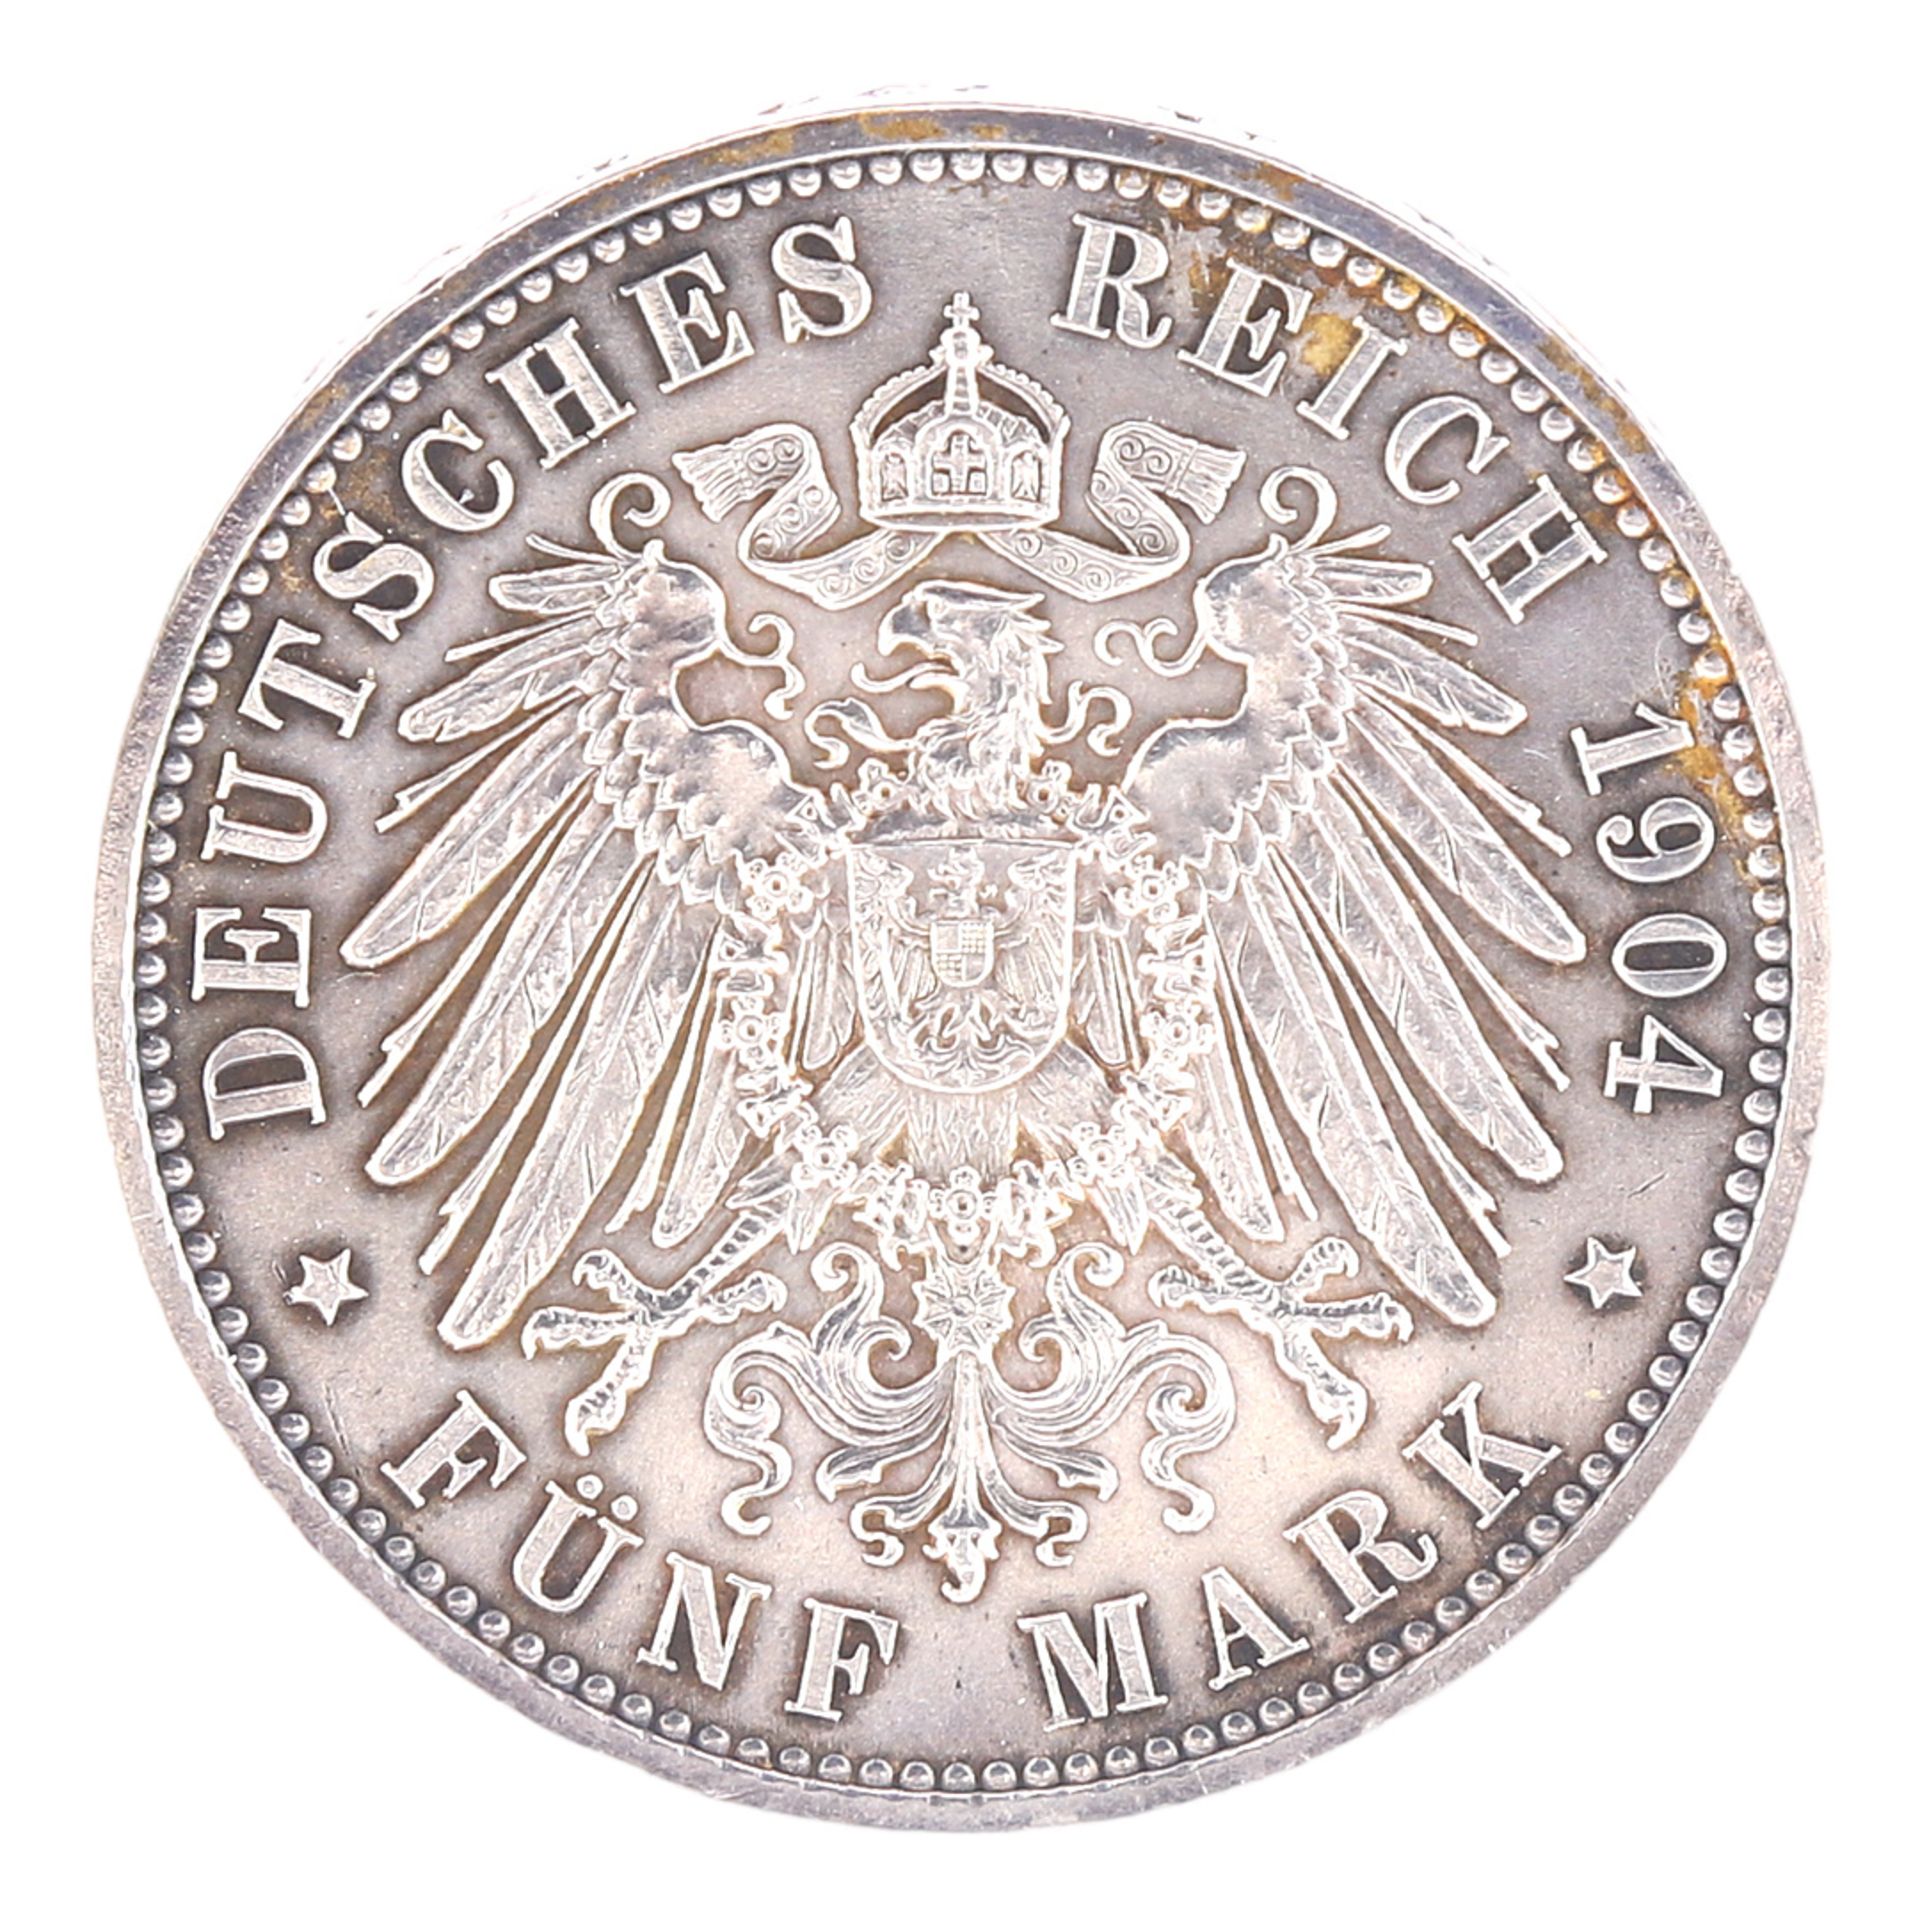 5 marks German Empire, King George, Saxony - Image 2 of 2